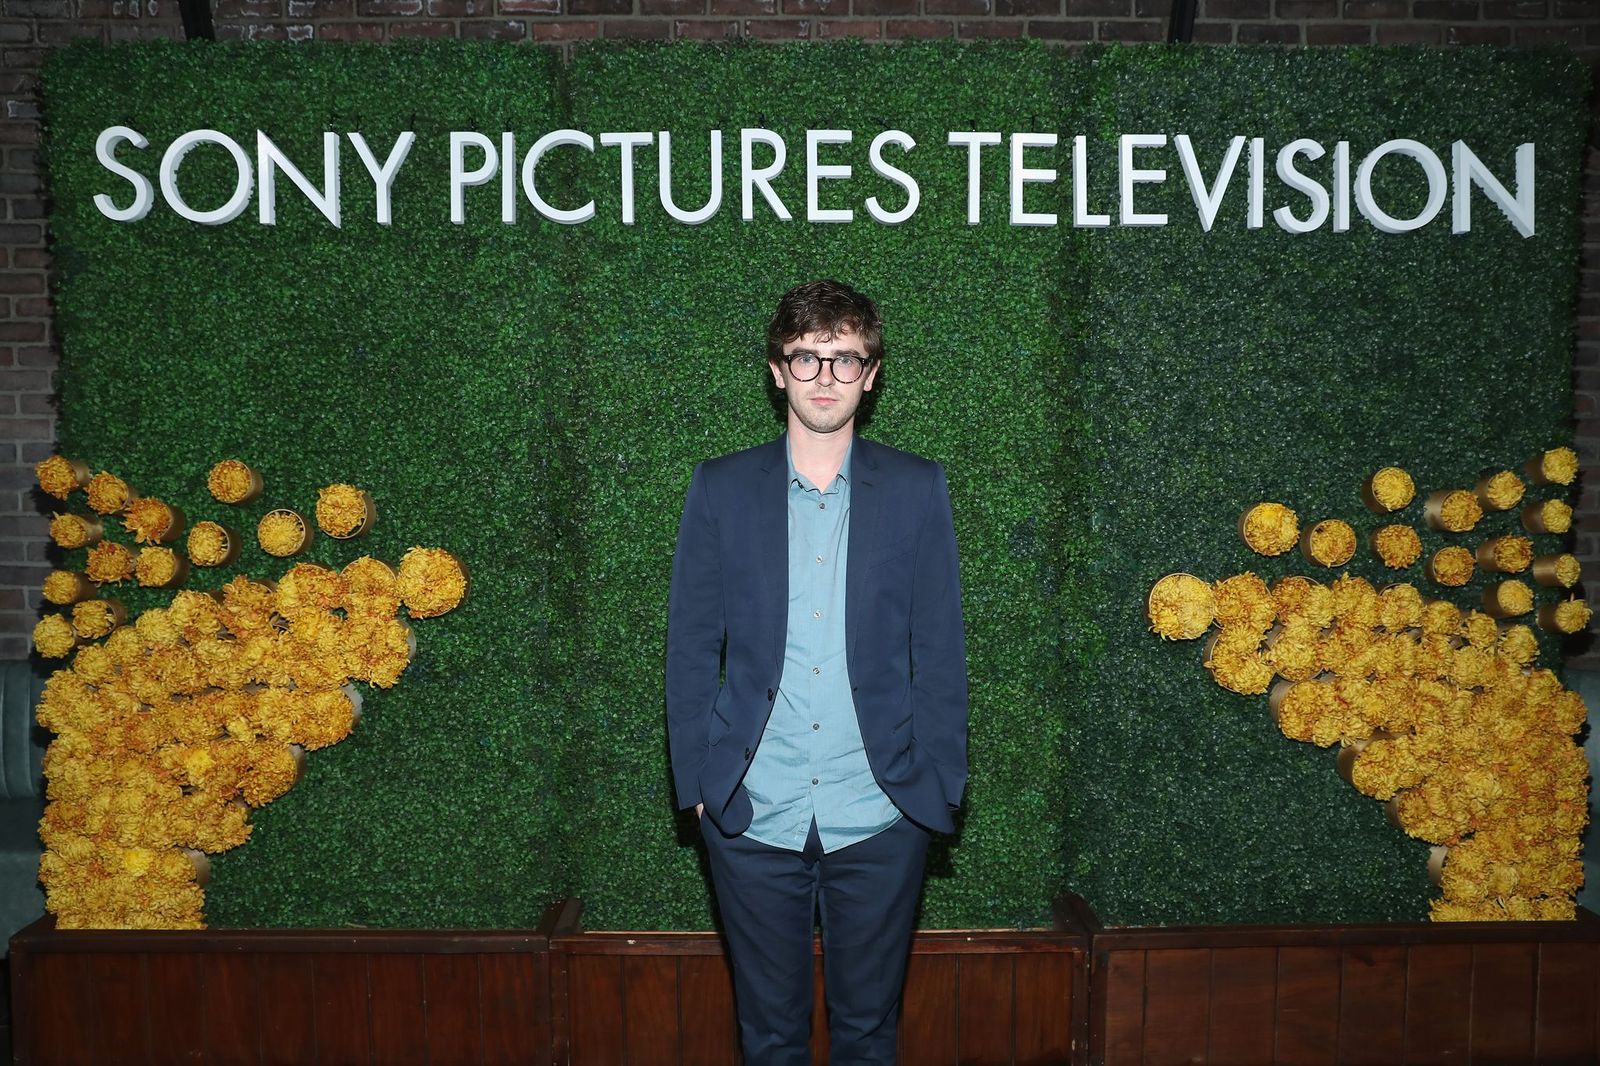 Image Credits: Getty Images / Freddie Highmore